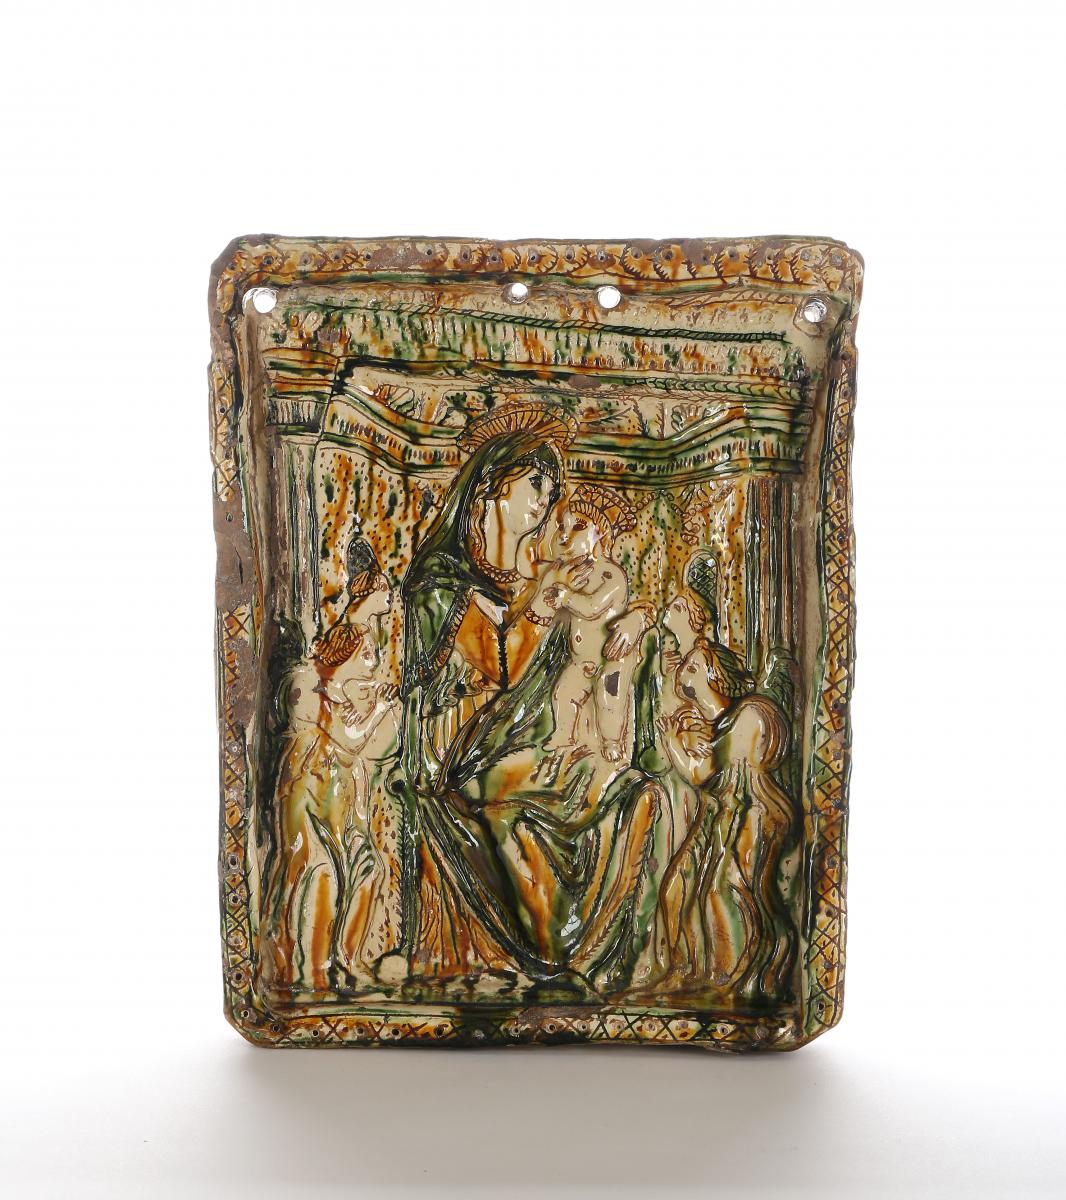 An Incised Slipware Plaque of the Madonna and Child